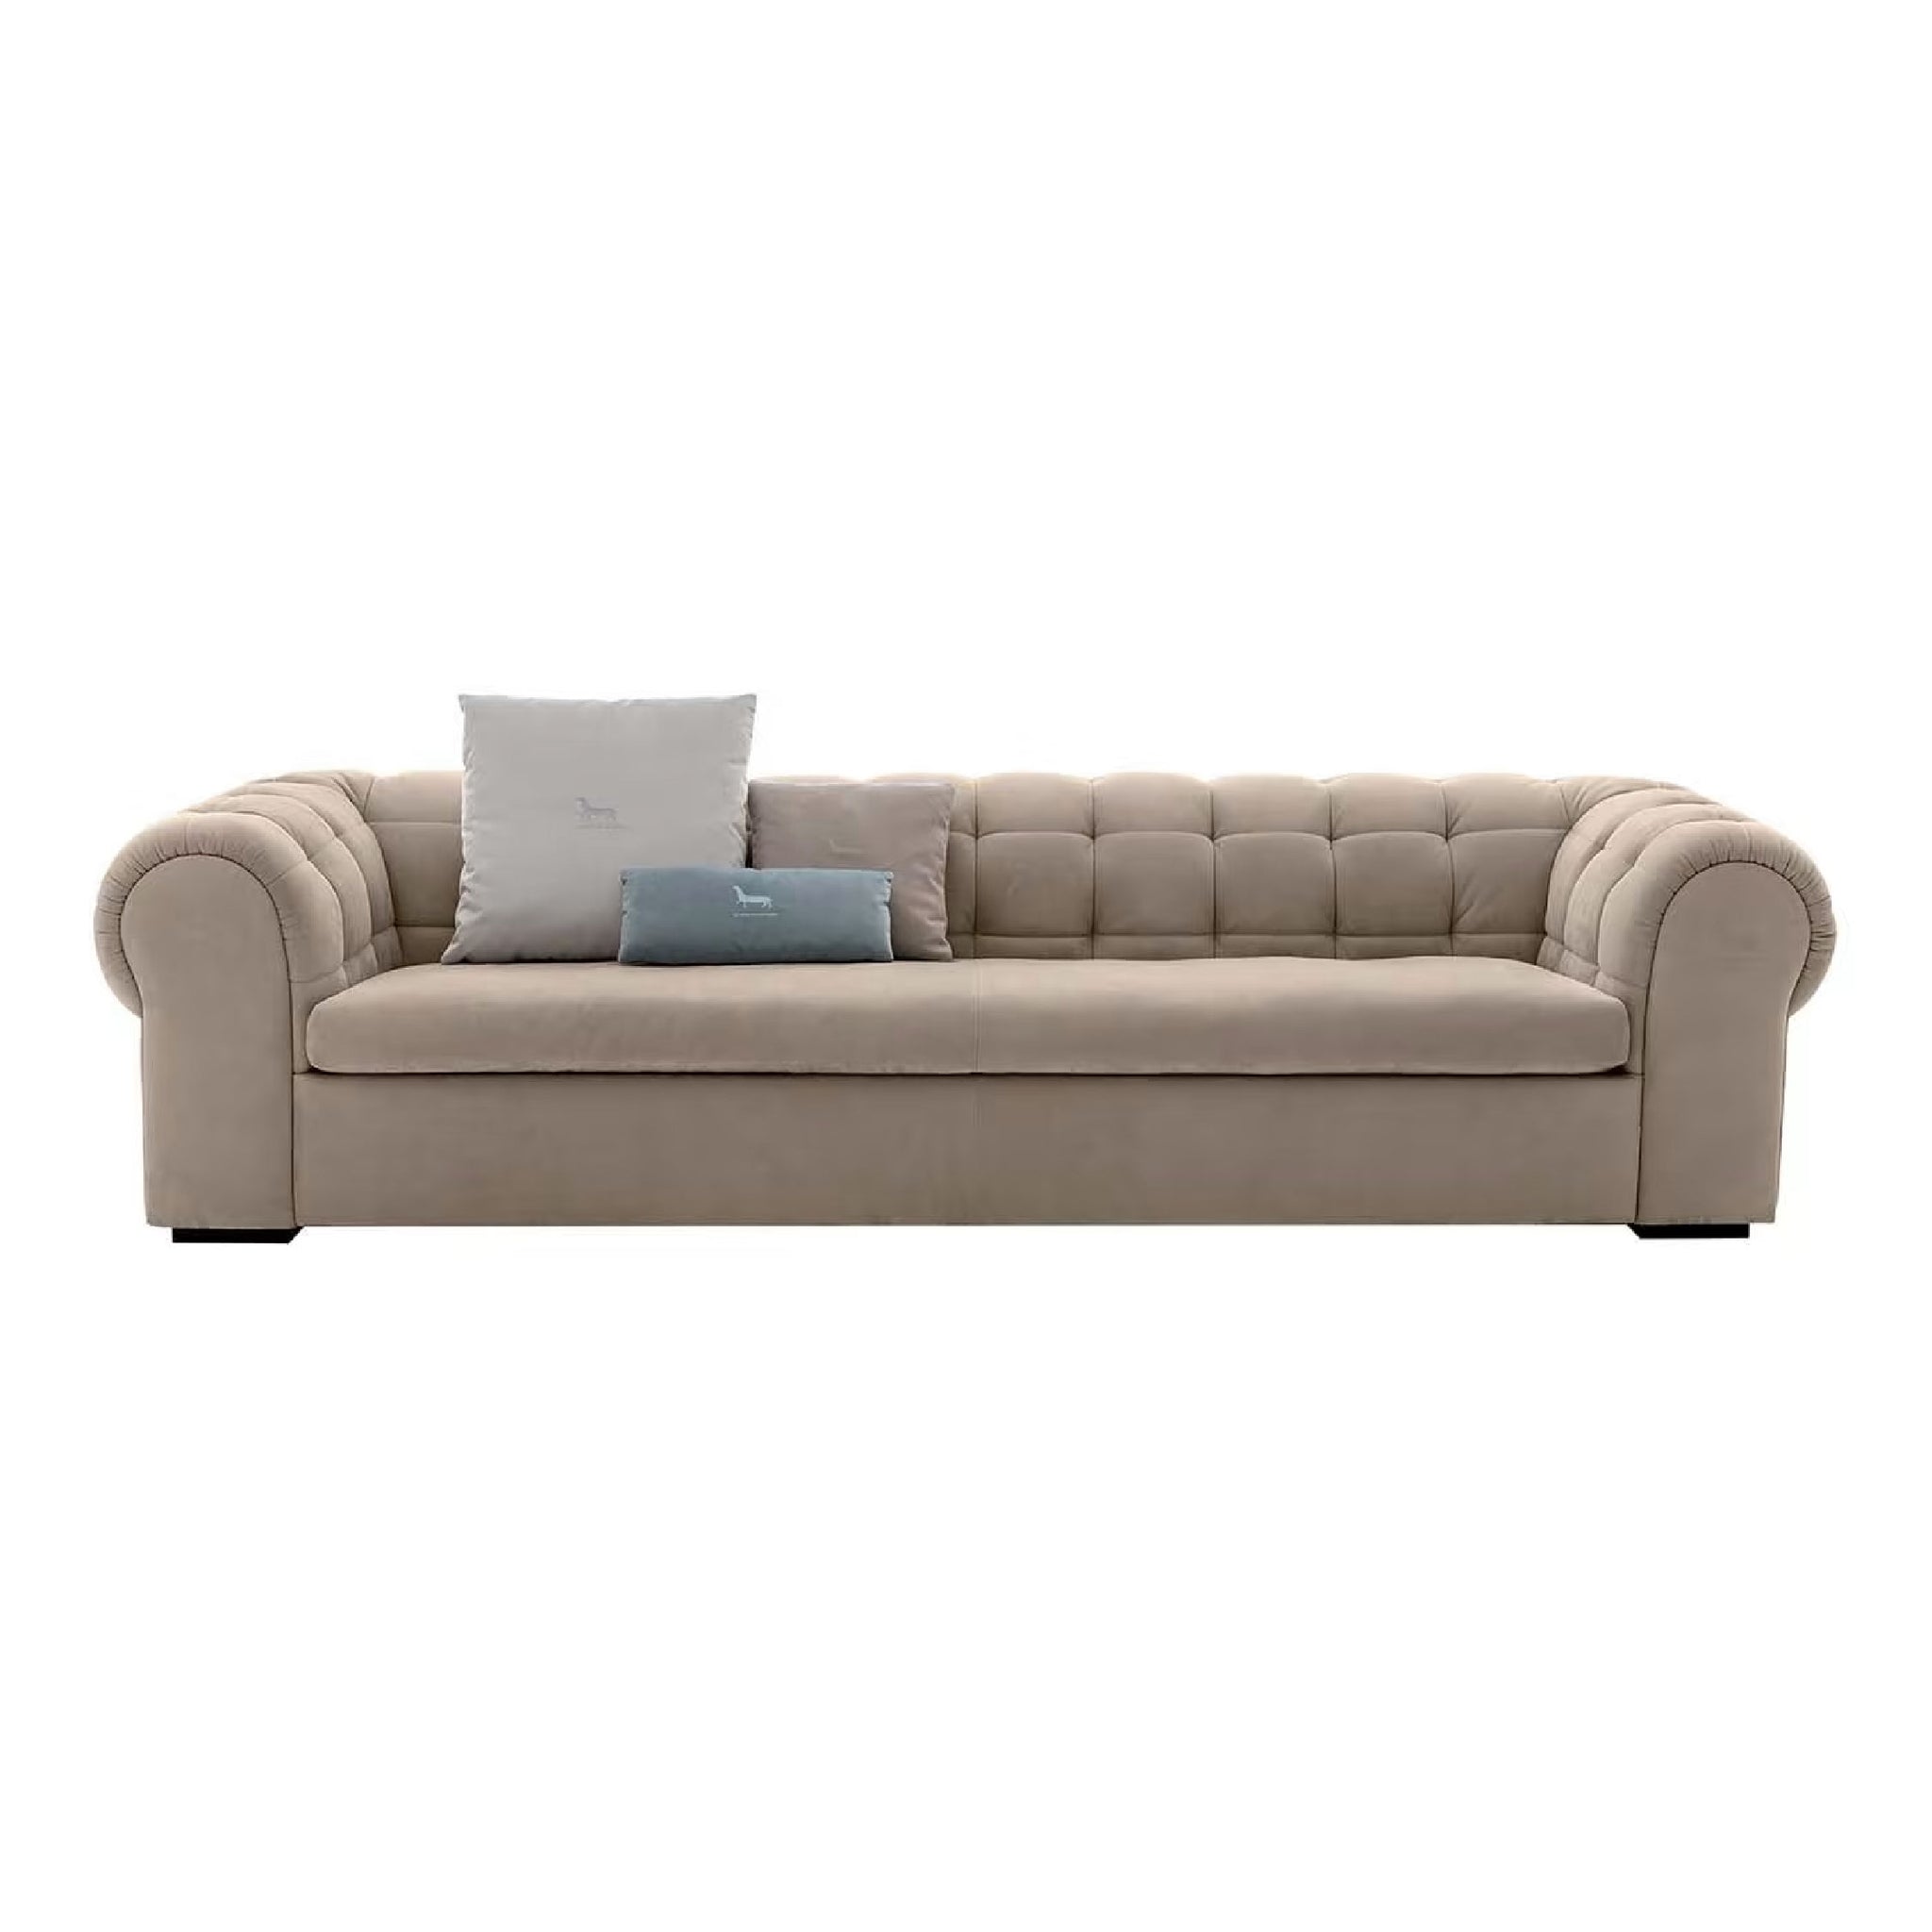 Viking Chesterfield Designer Sofa Front View